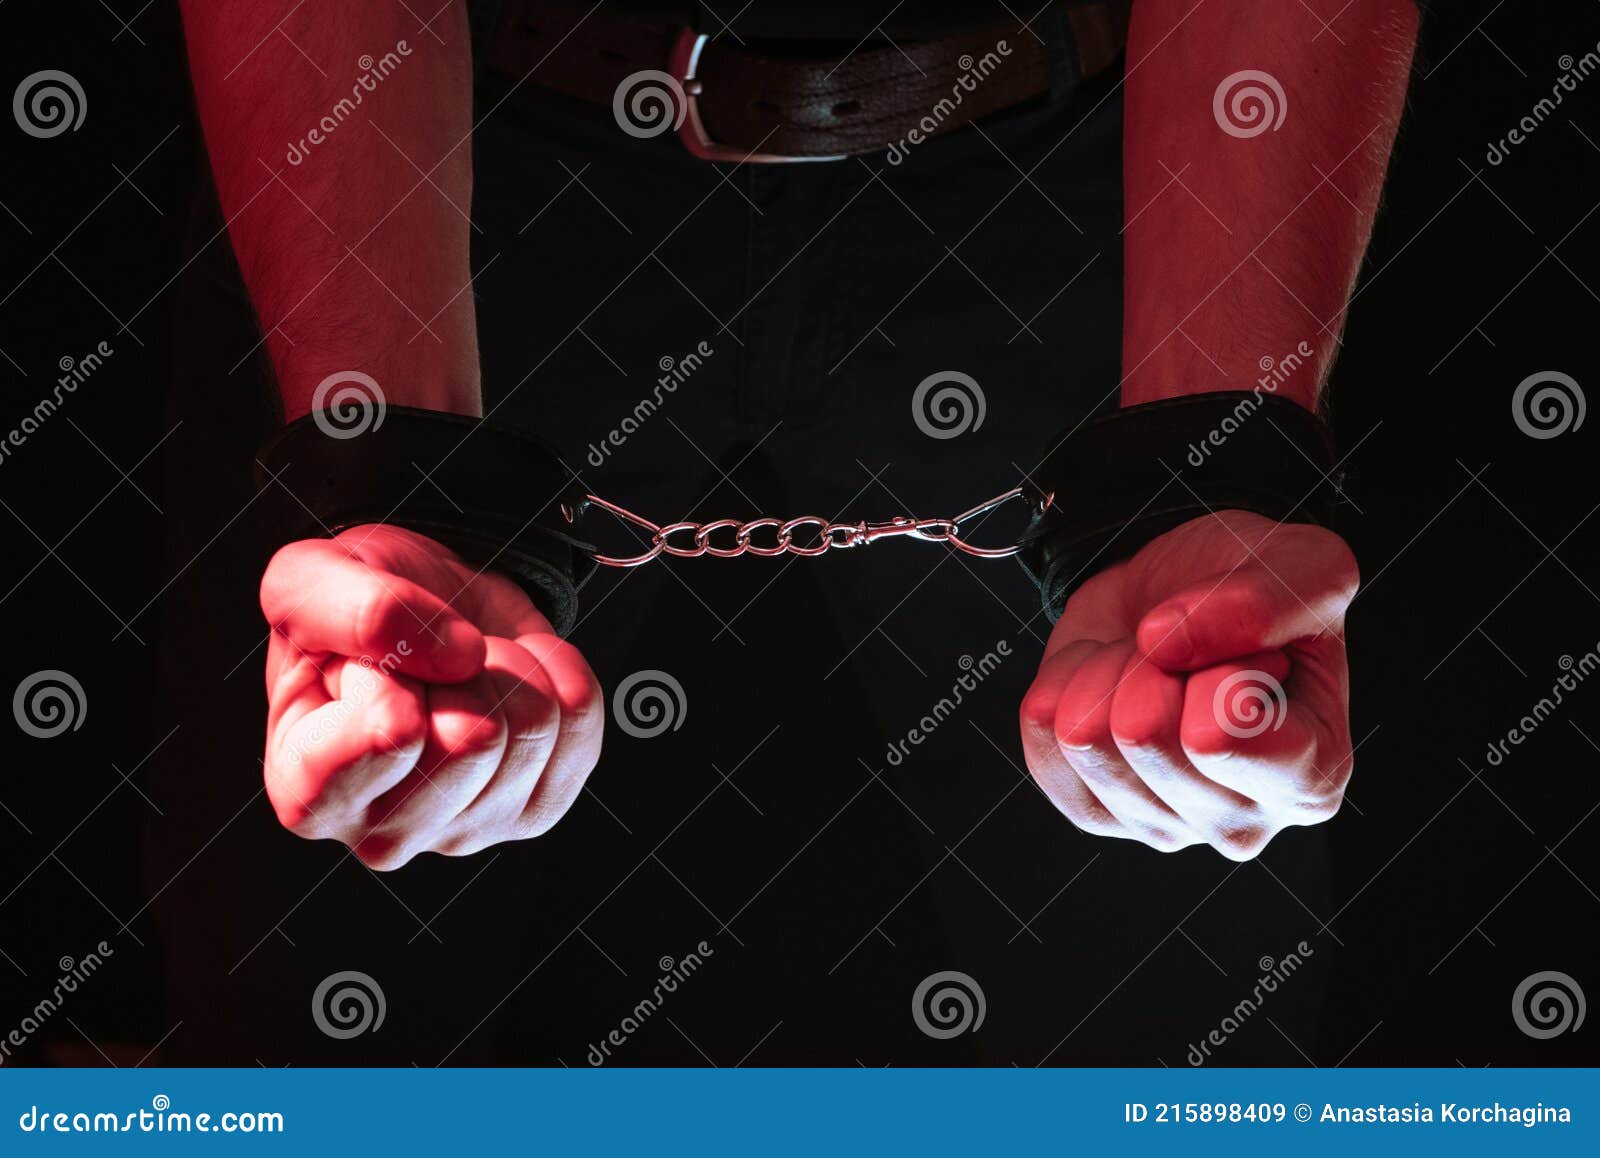 Men S Hands Chained In Leather Handcuffs For Bdsm Sex Behind His Back